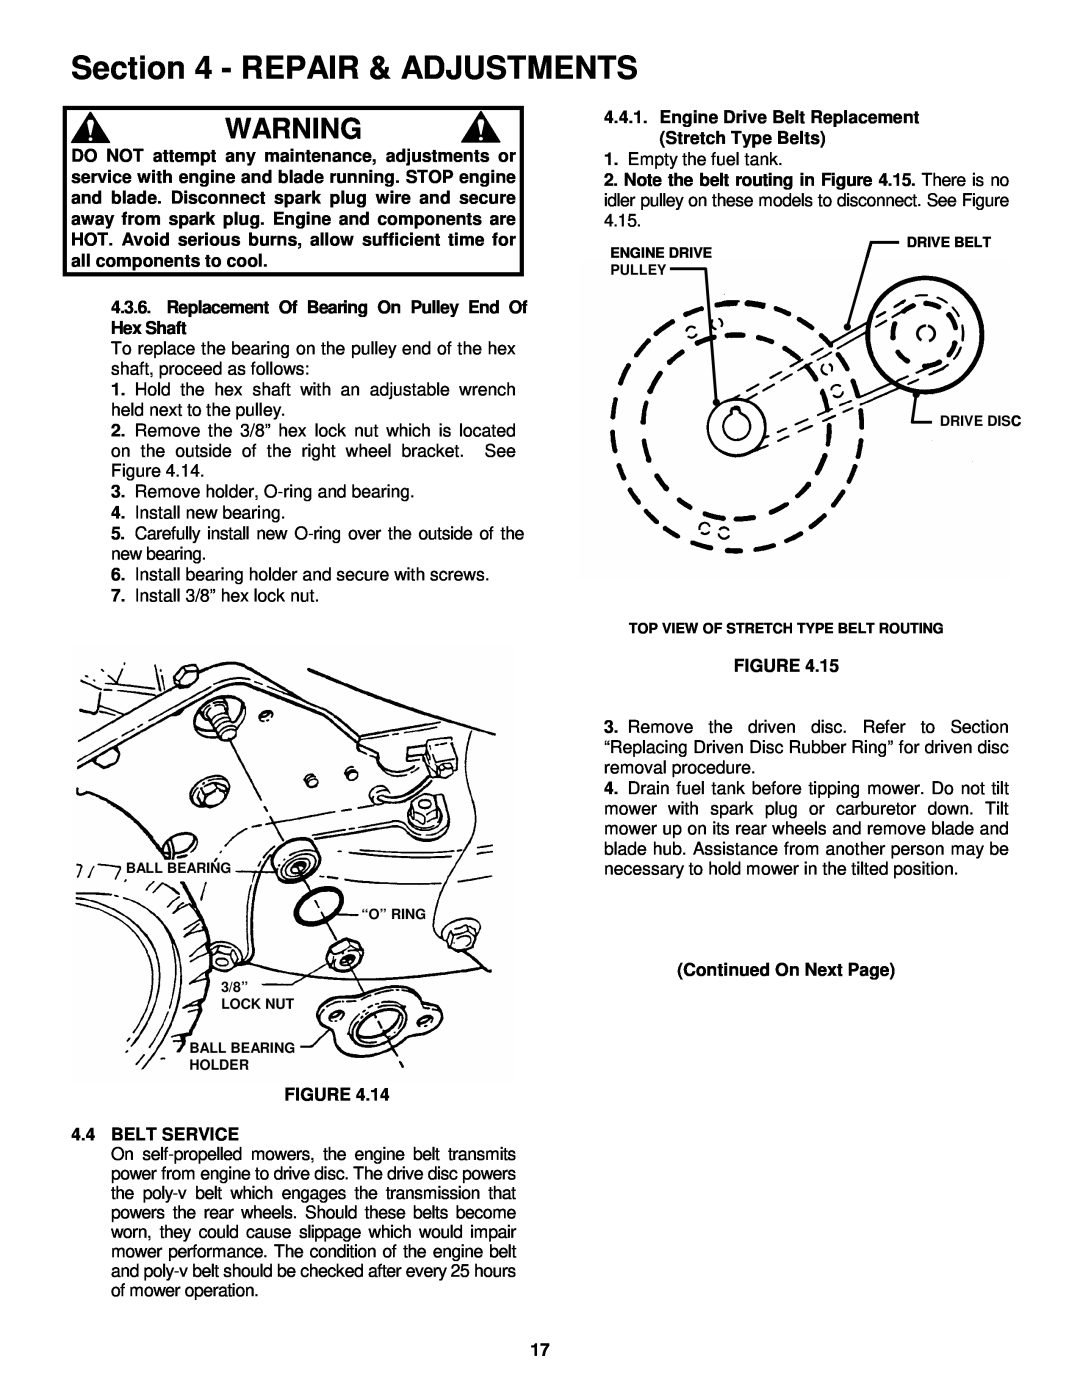 Snapper important safety instructions Repair & Adjustments, Remove holder, O-ring and bearing 4. Install new bearing 